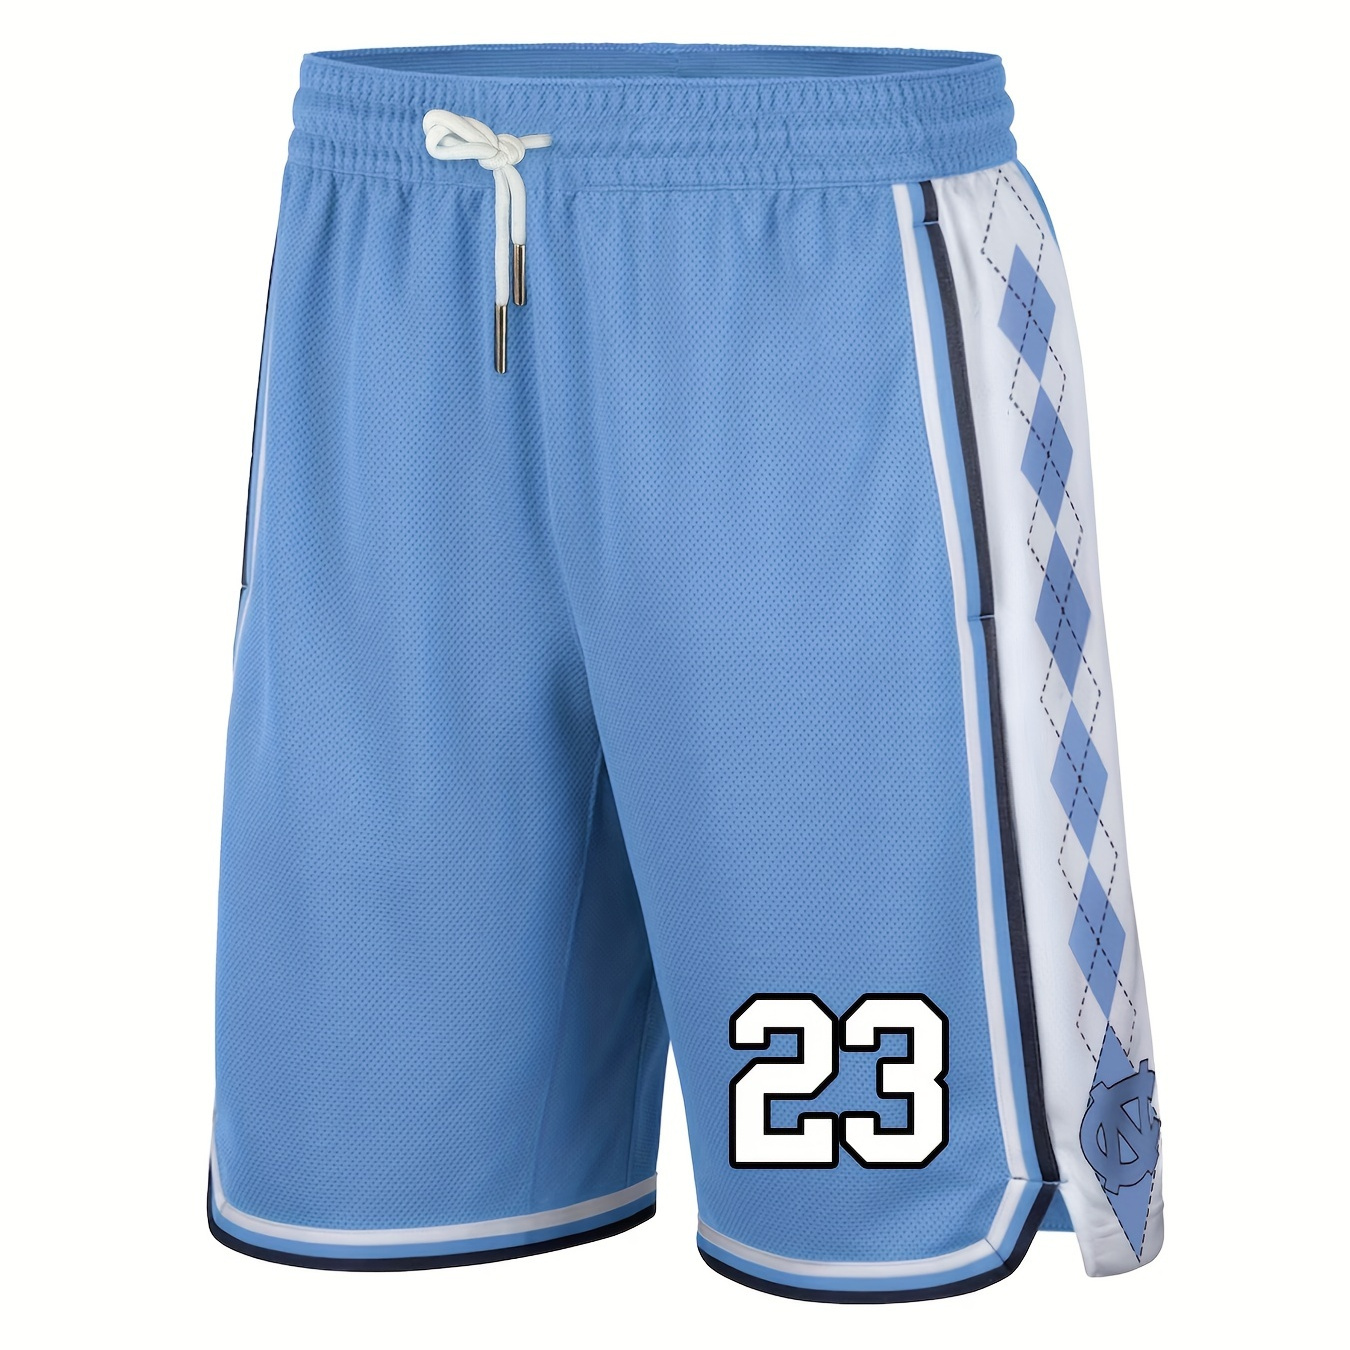 

Men's Argyle #23 Print Basketball Jersey Shorts For Competition Party Training